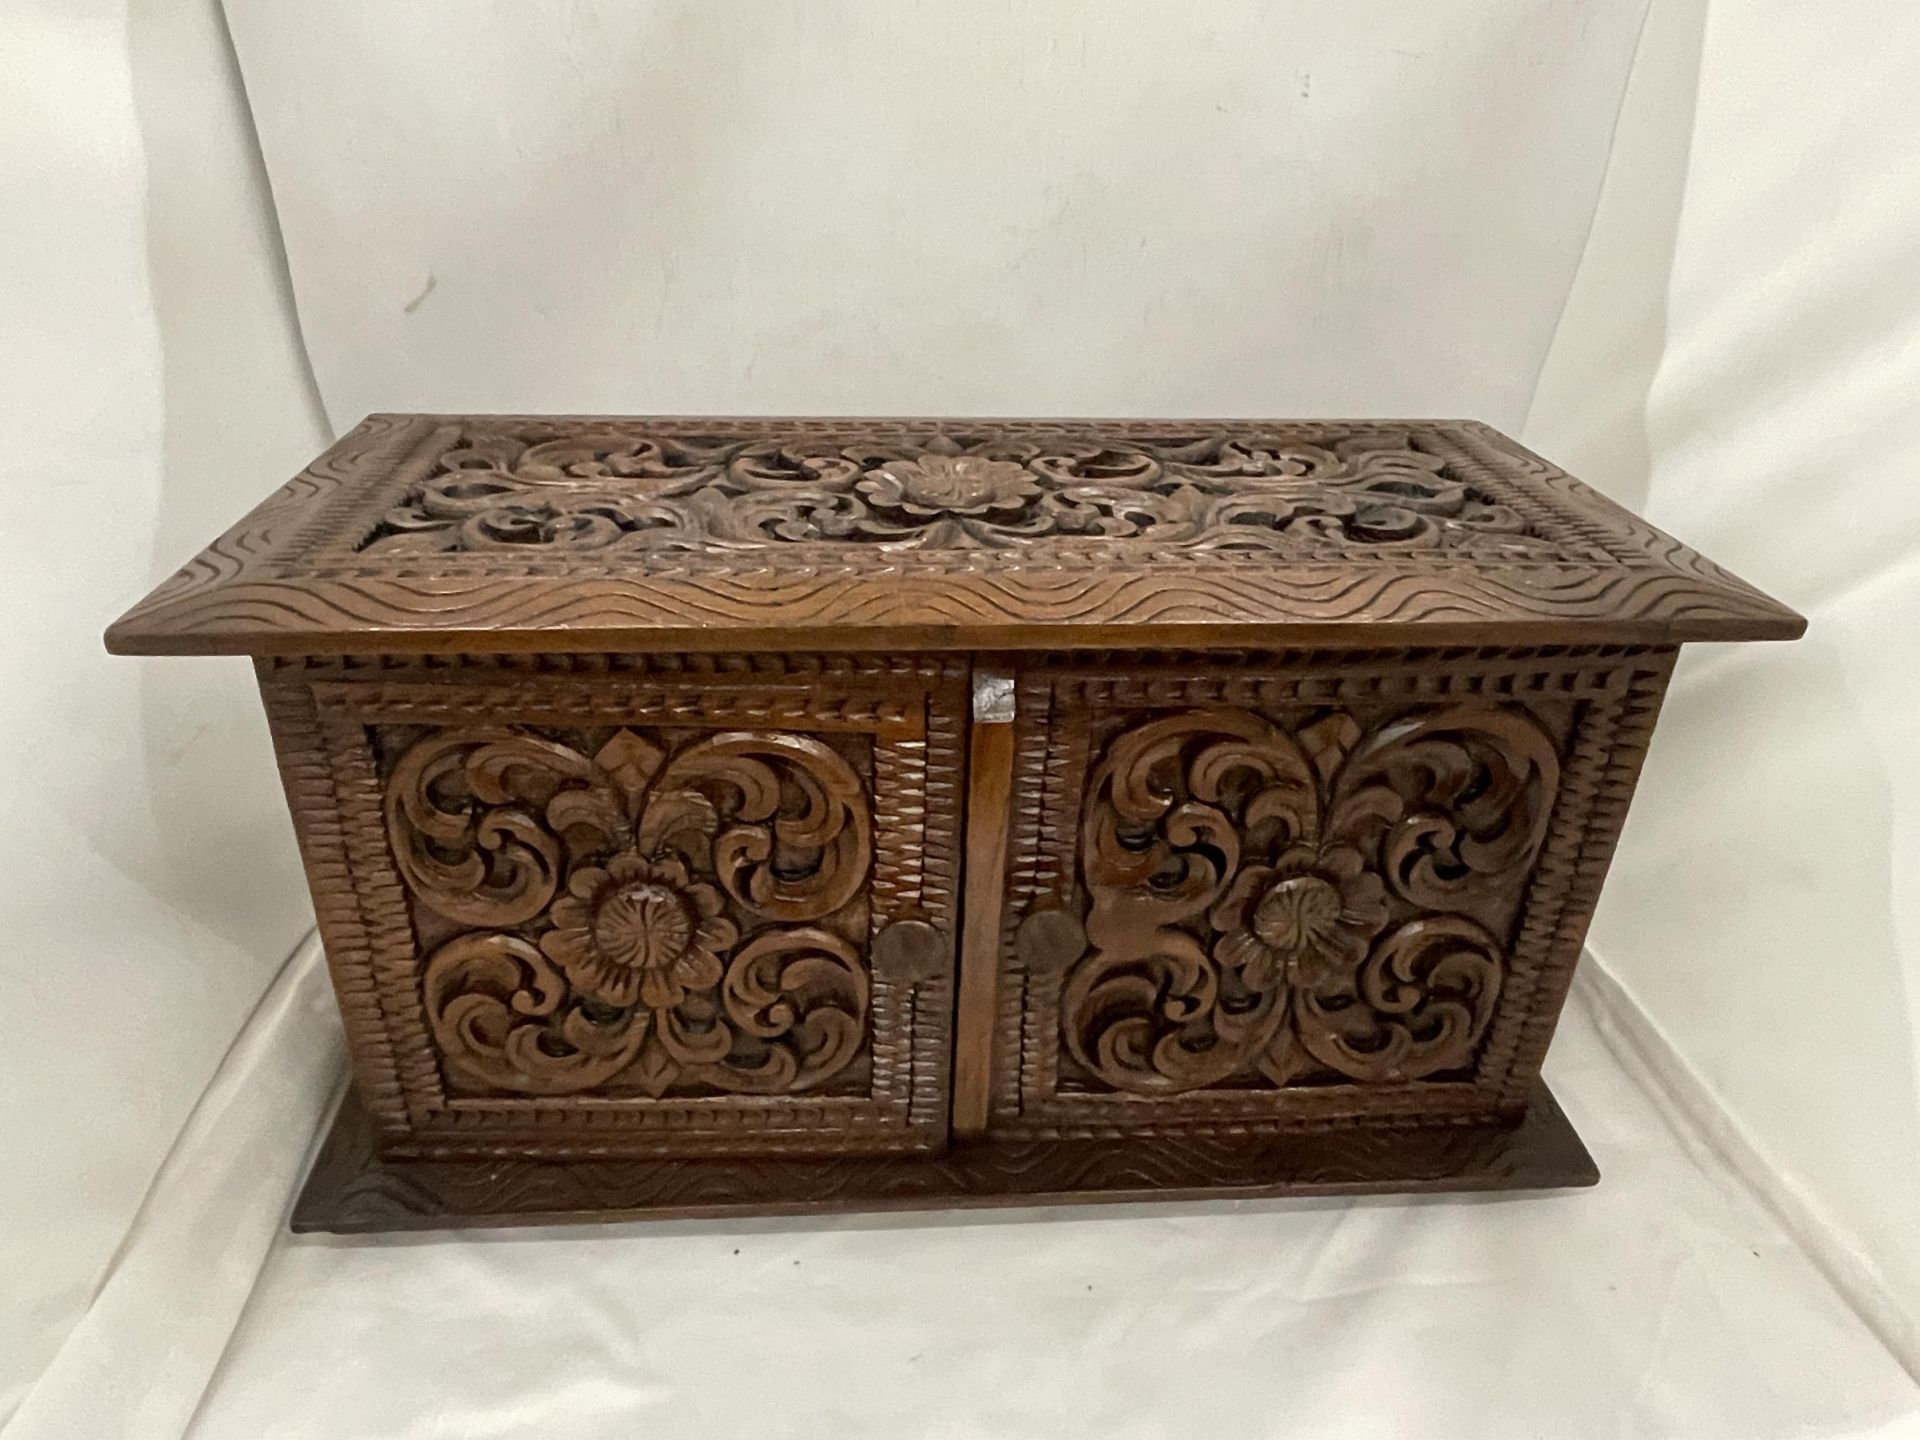 A HEAVILY CARVED JEWELLERY BOX WITH TWO DOORS REVEALING FOUR LINED DRAWERS AND A LIFT UP LID WITH